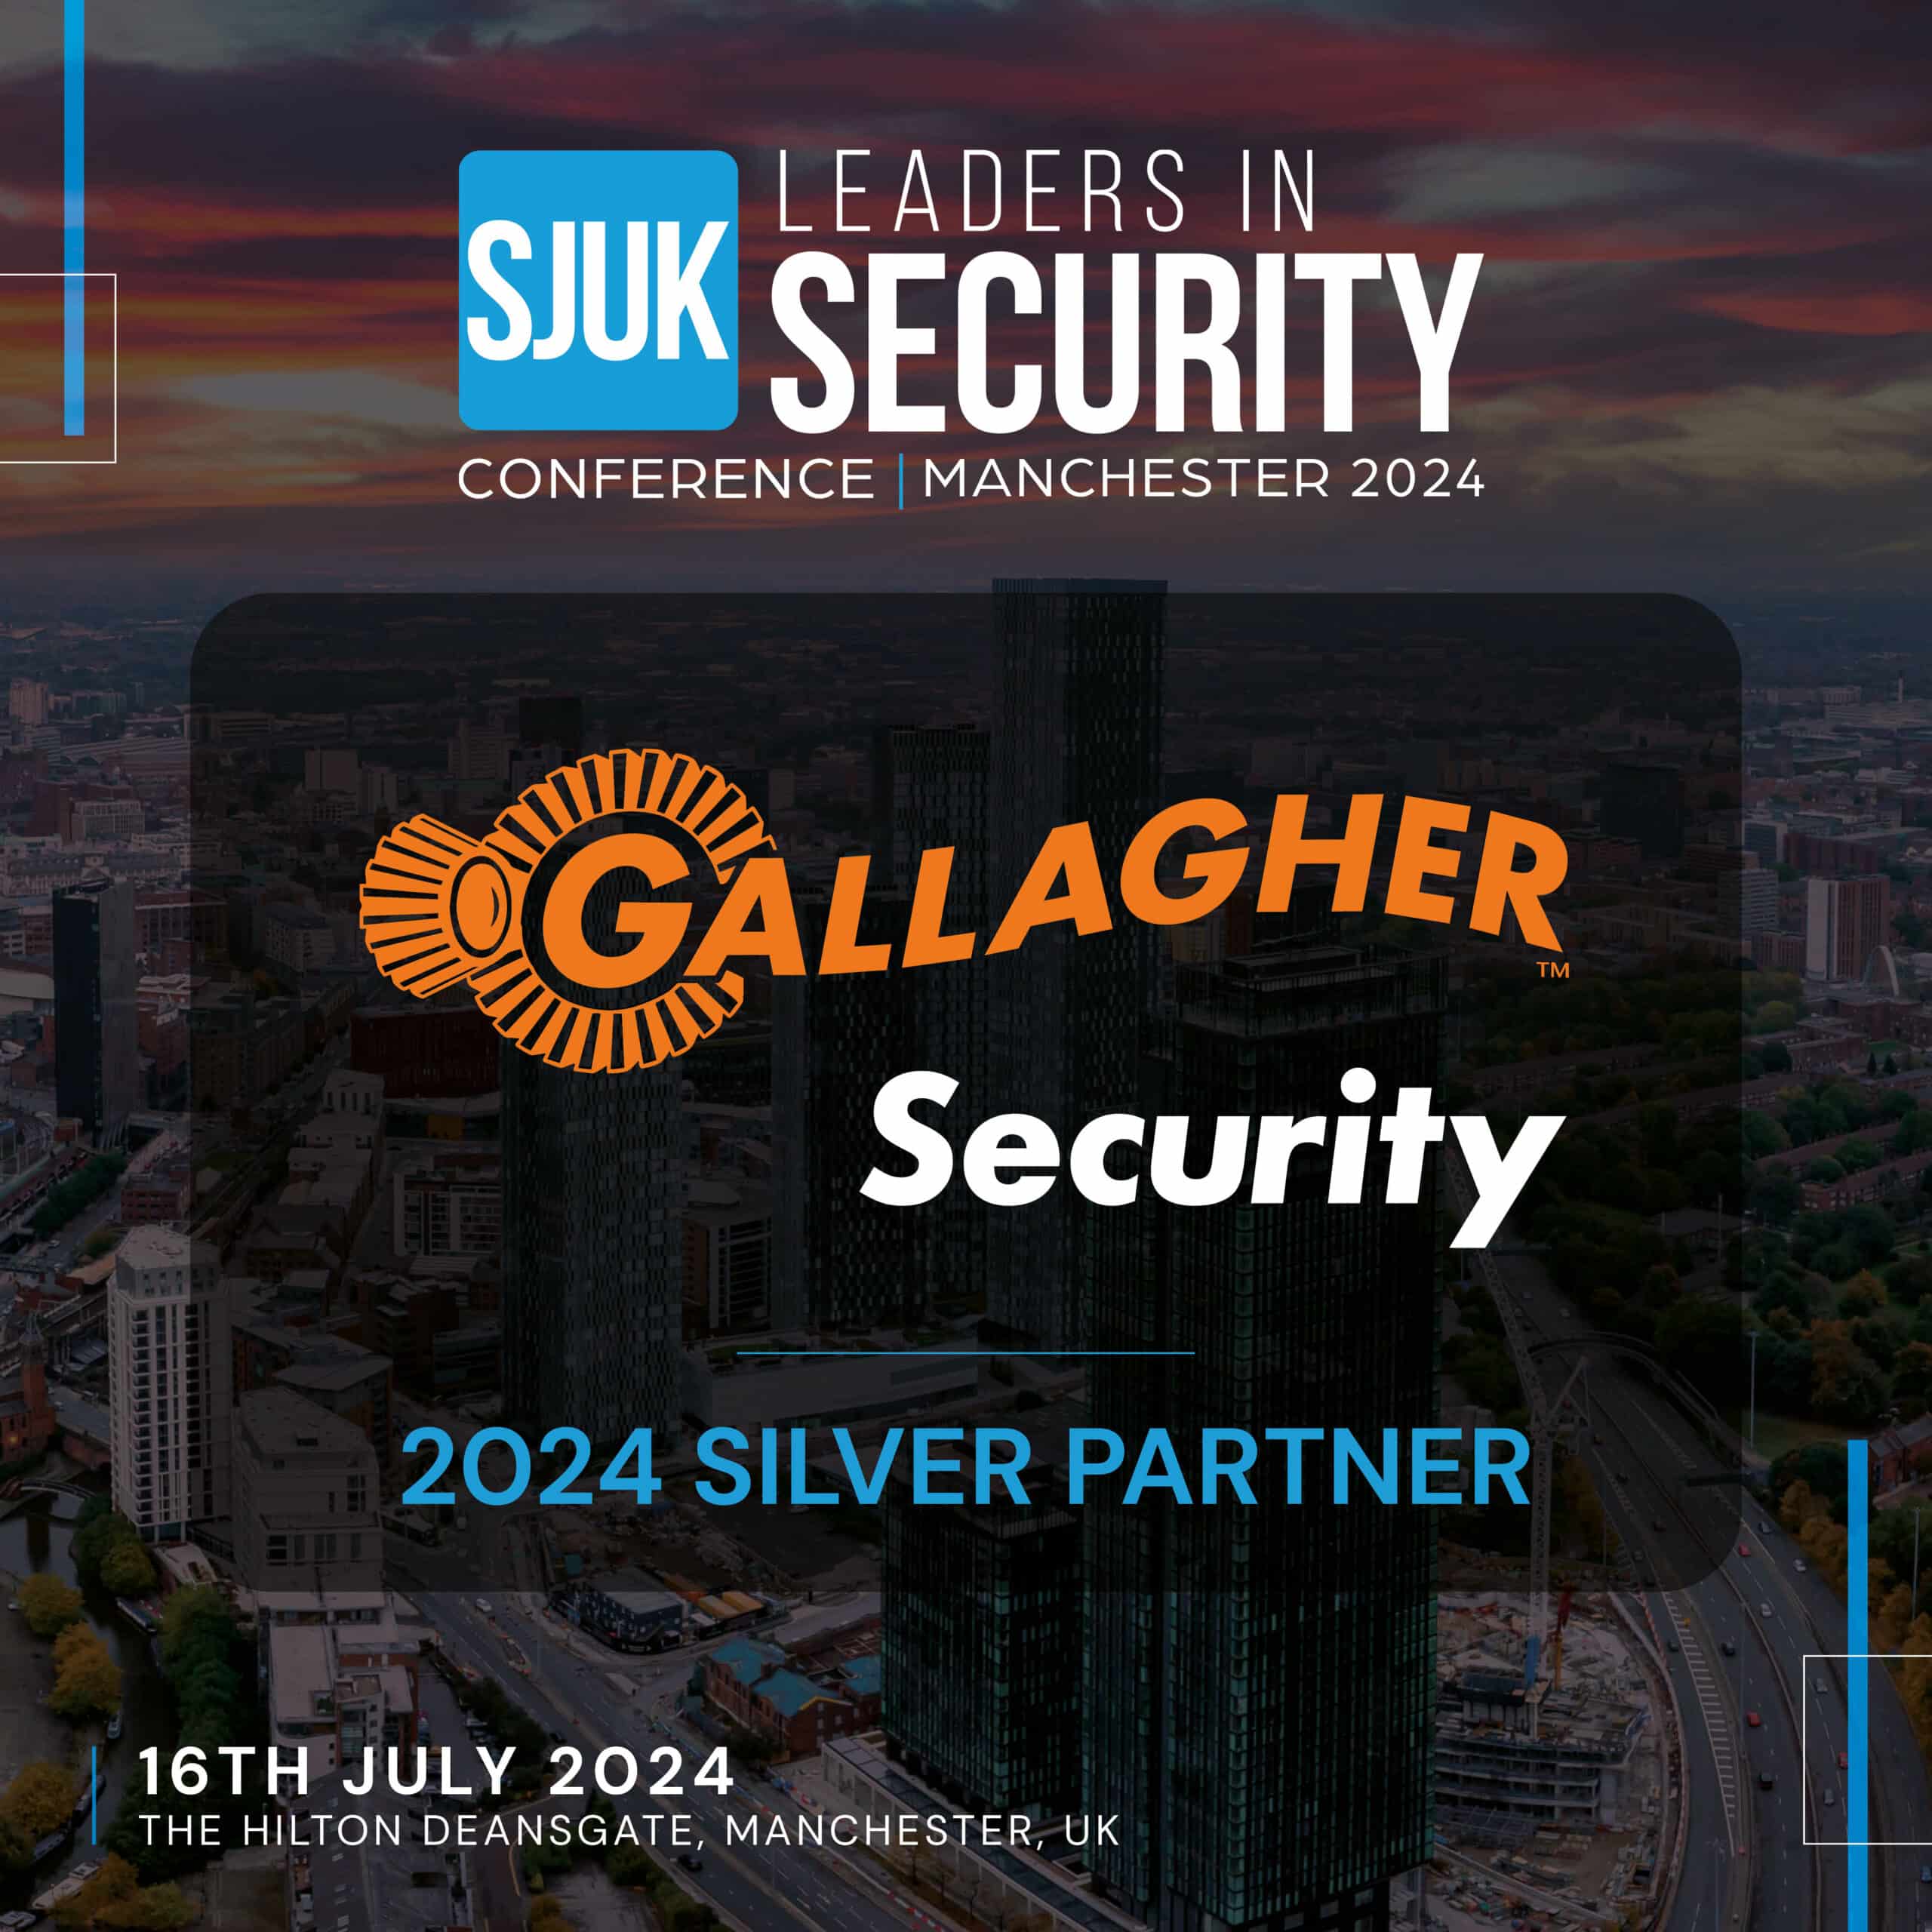 Gallagher Security confirmed as Silver Partner for SJUK Leaders in Security Conference